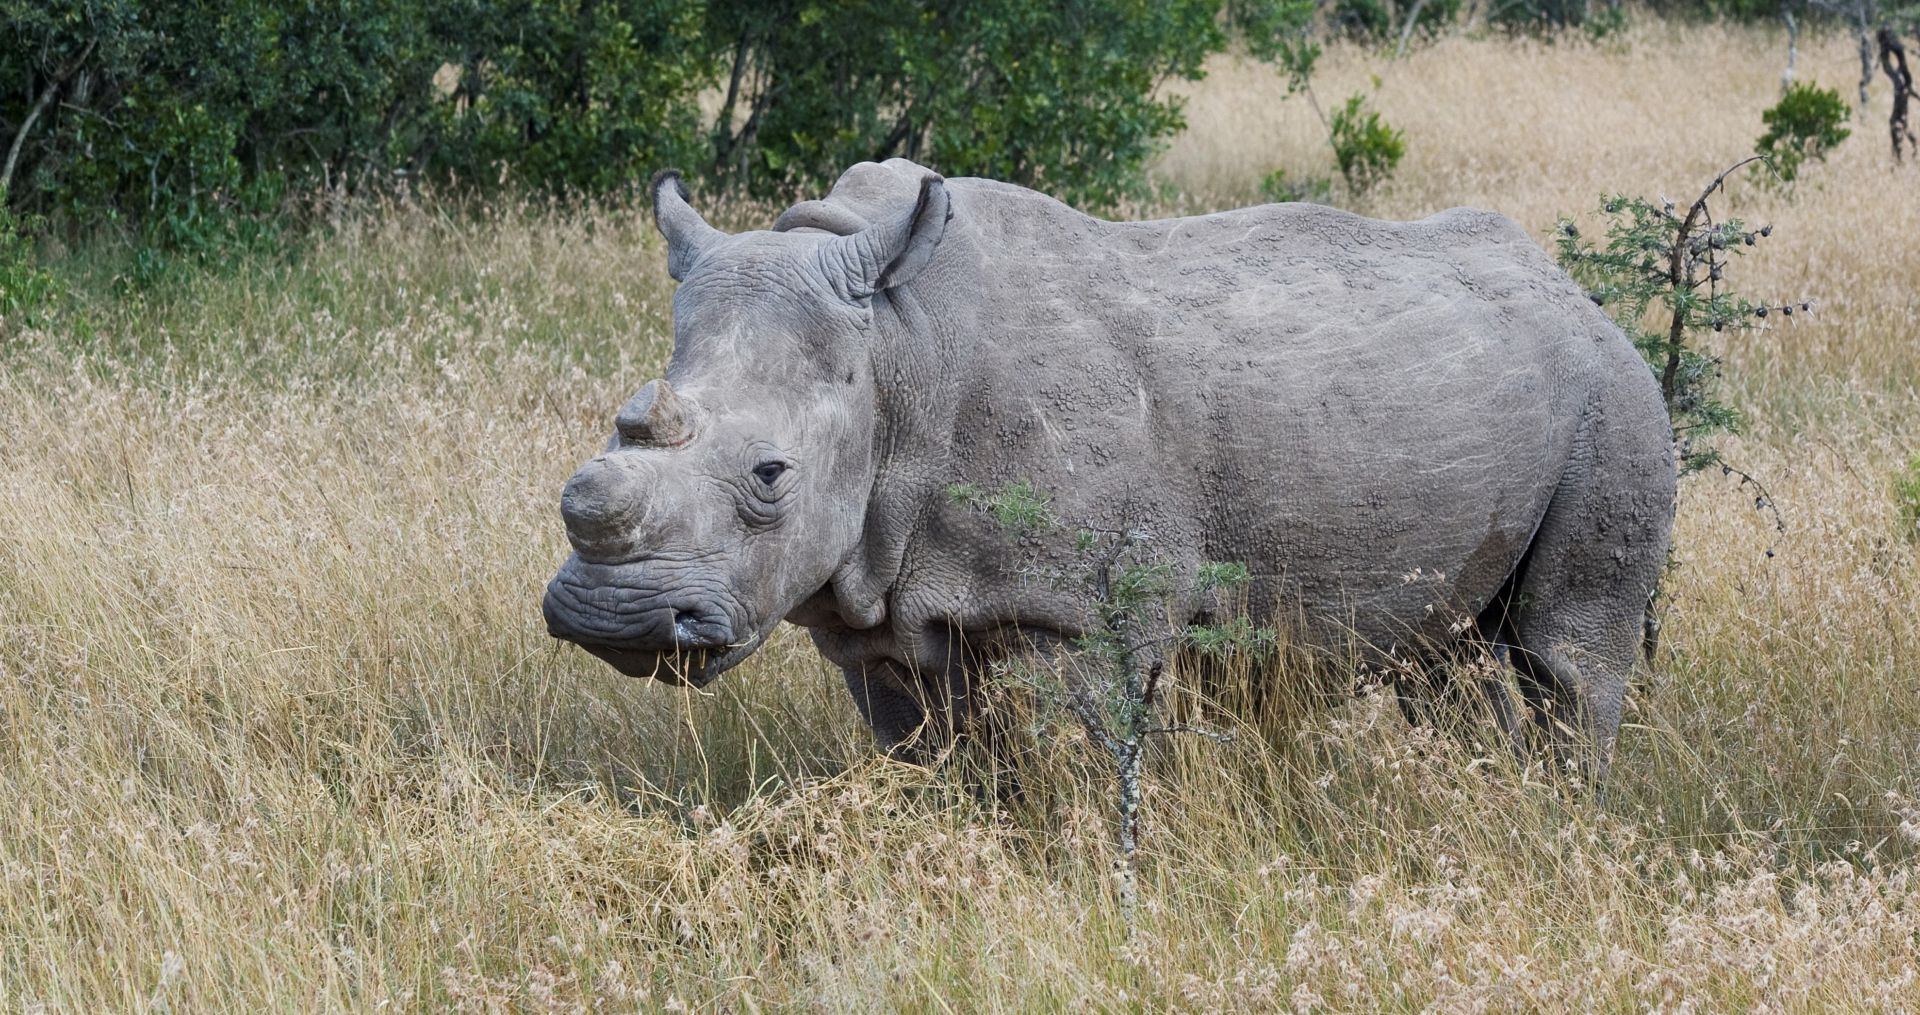 Northern White Rhino: Facts About The World's Rarest Rhino